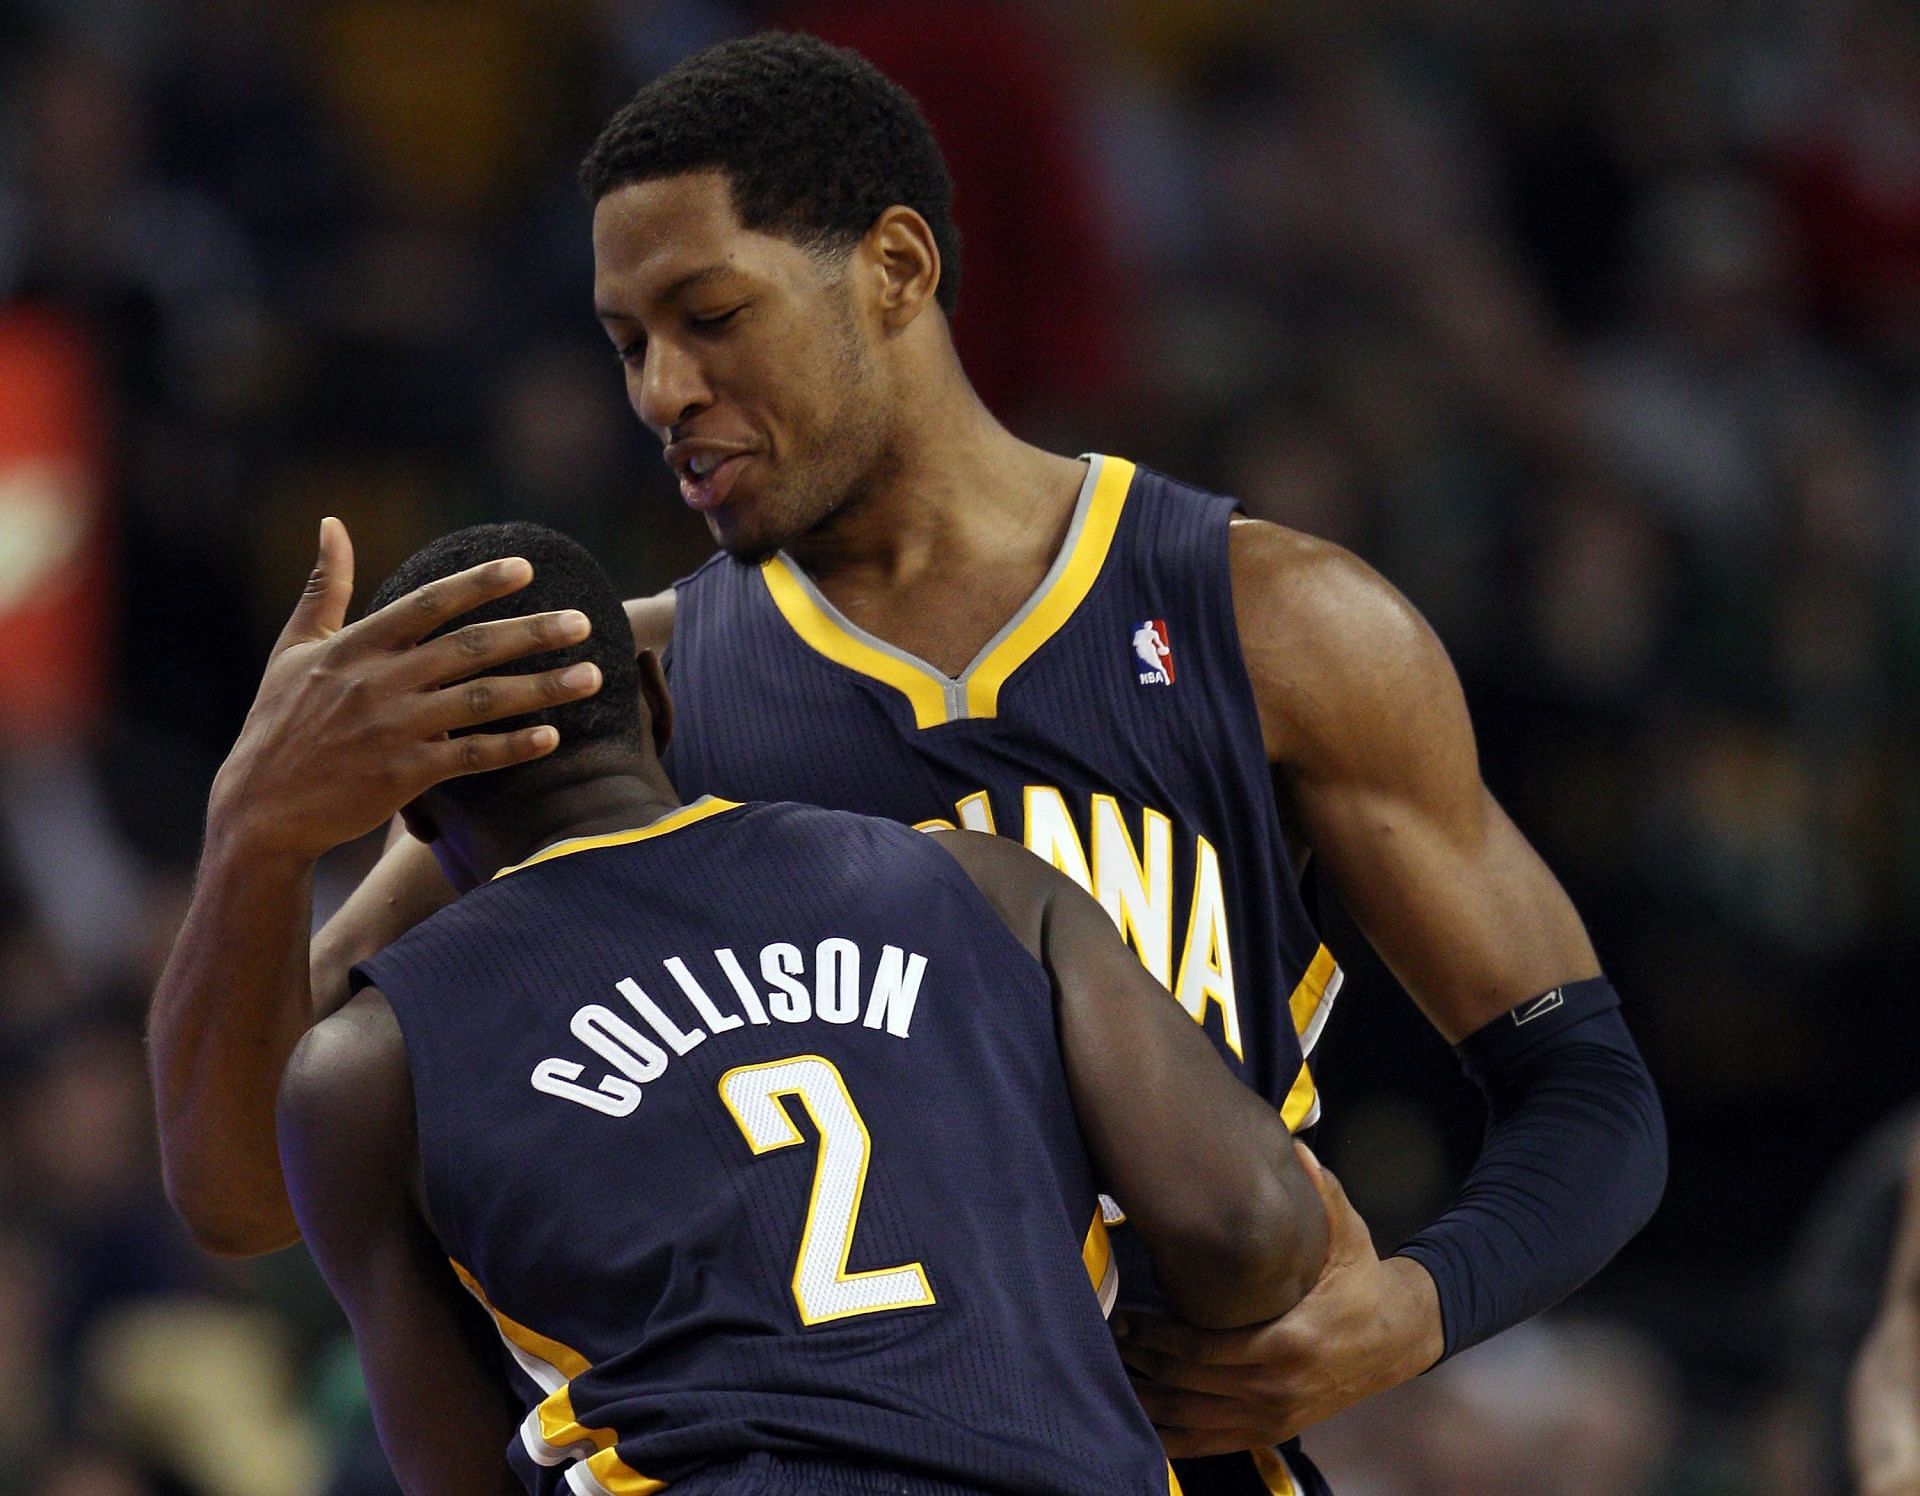 Danny Granger and Darren Collison both played for the Pacers (Image via Getty Images)